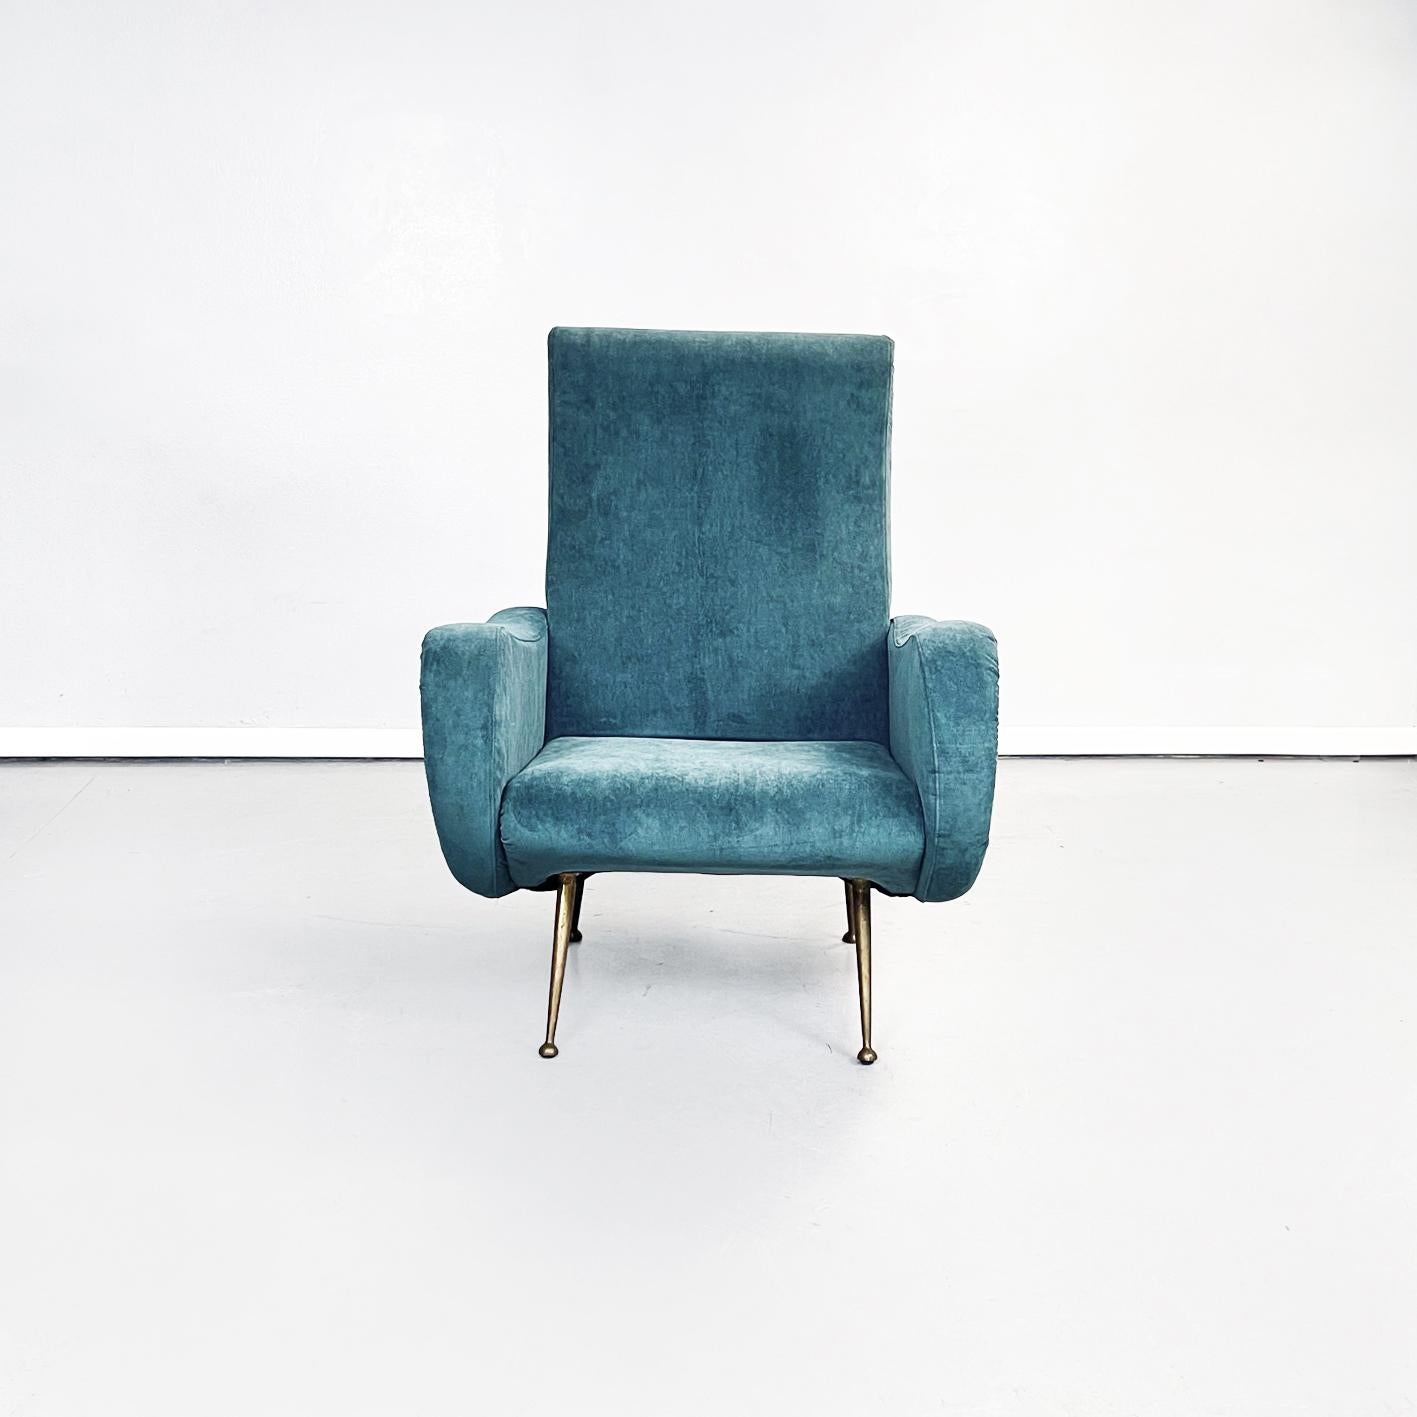 Italian Mid-Century Modern armchair in blue fabric and brass feet, 1950s.
Armchair upholstered and covered in blue fabric. The back is slightly curved. Rounded armrests. Brass legs with round feet.
The armchair from 1950s period its a original piece